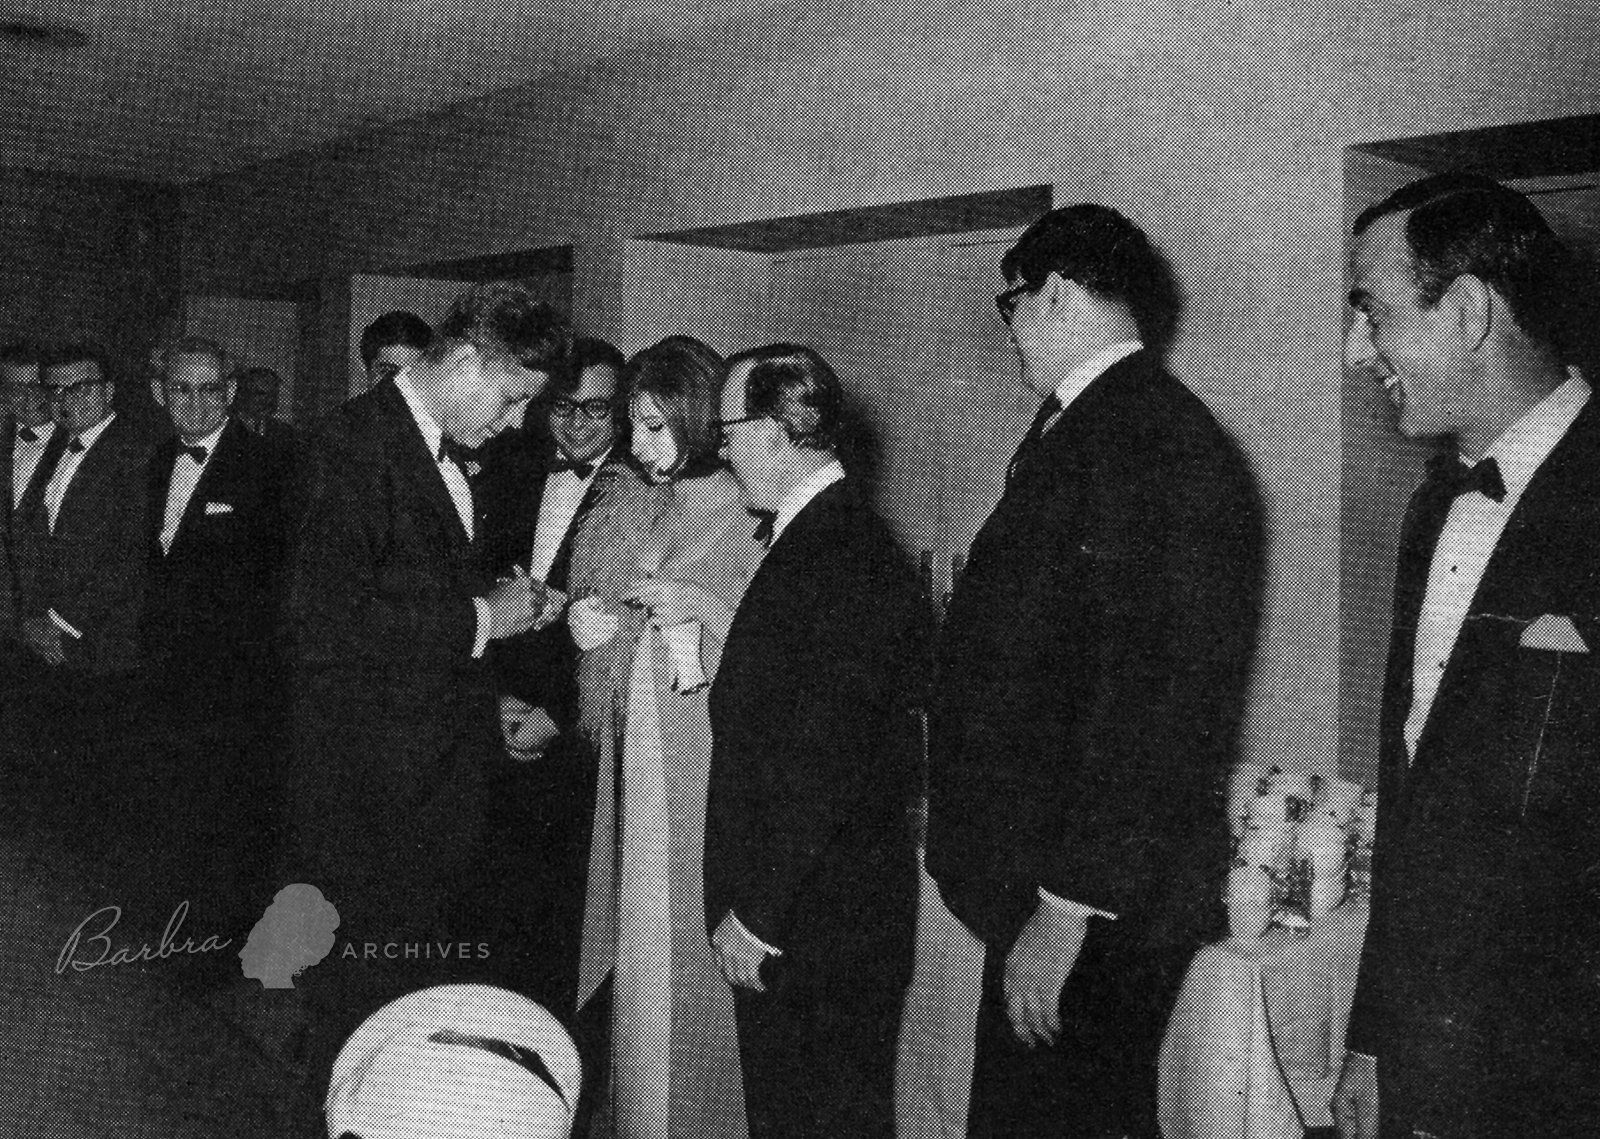 Streisand gets President Kennedy to sign his autograph as manager Marty Erlichman looks on.